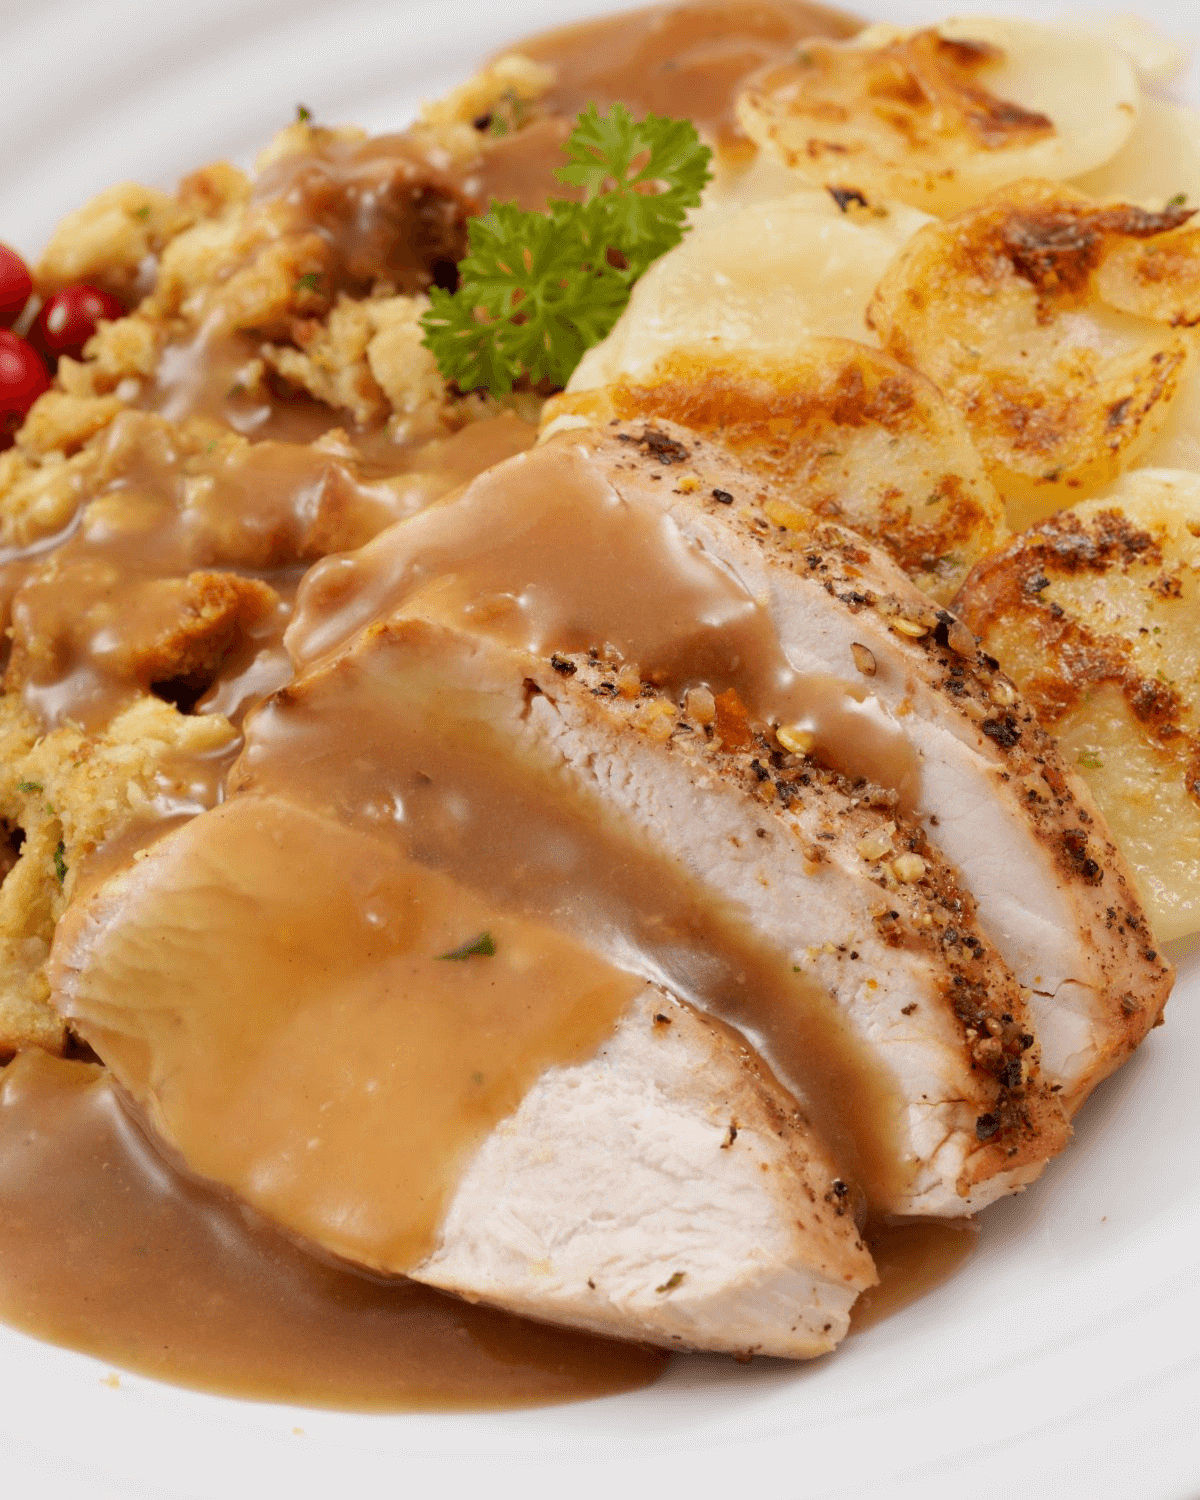 Turkey covered with turkey gravy from drippings.